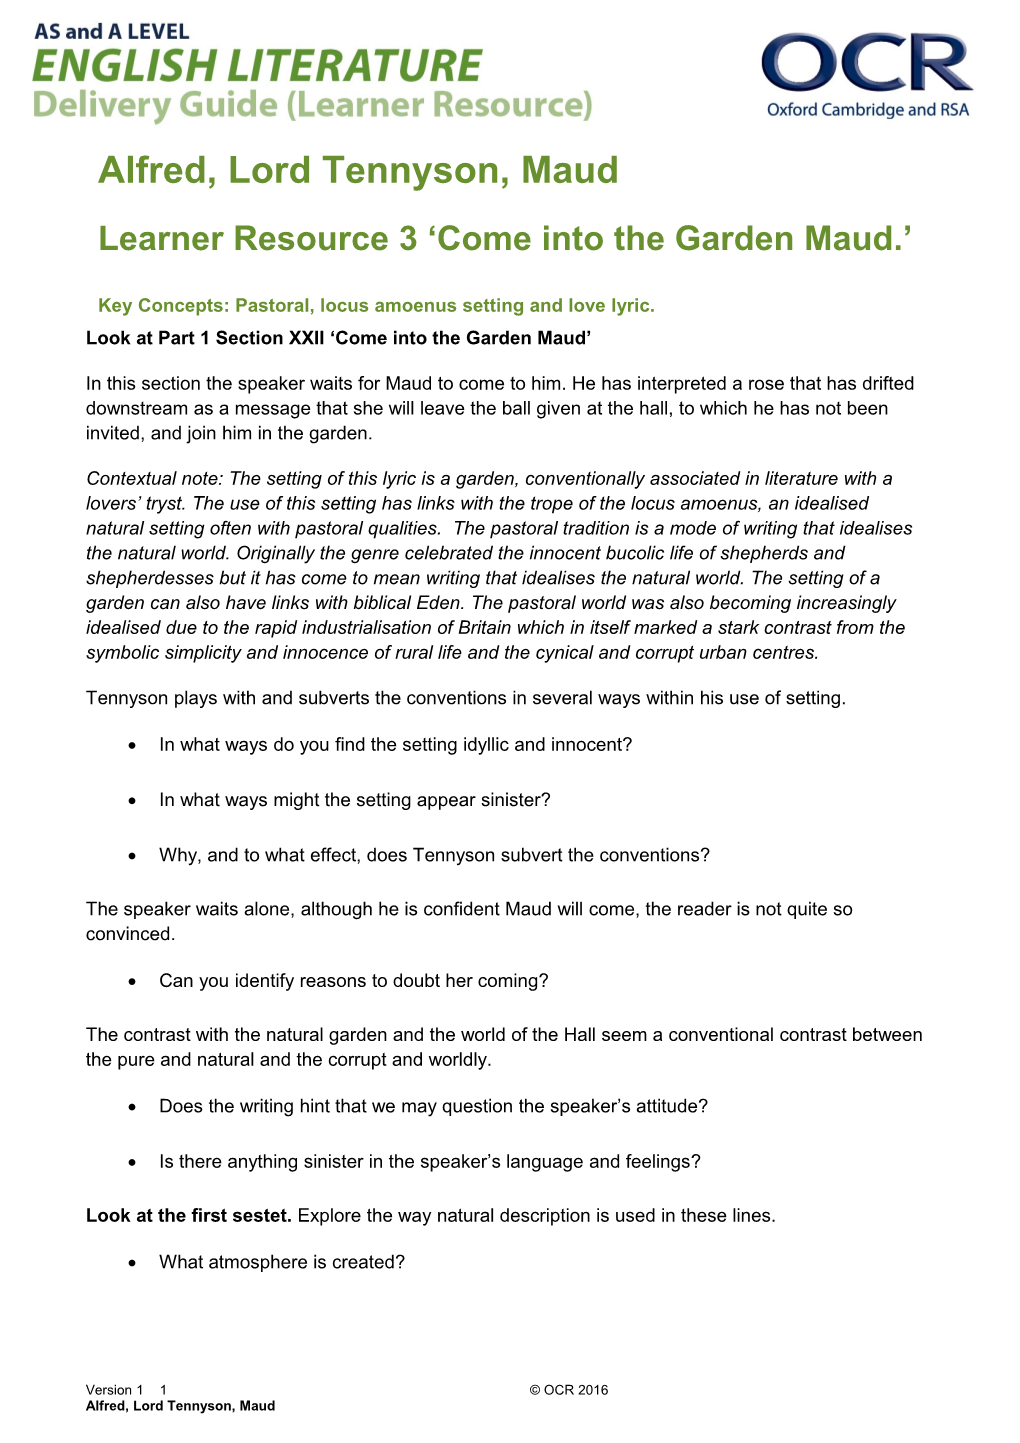 OCR a and AS Level English Literature, Alfred, Lord Tennyson - Maud Learner Resource 3